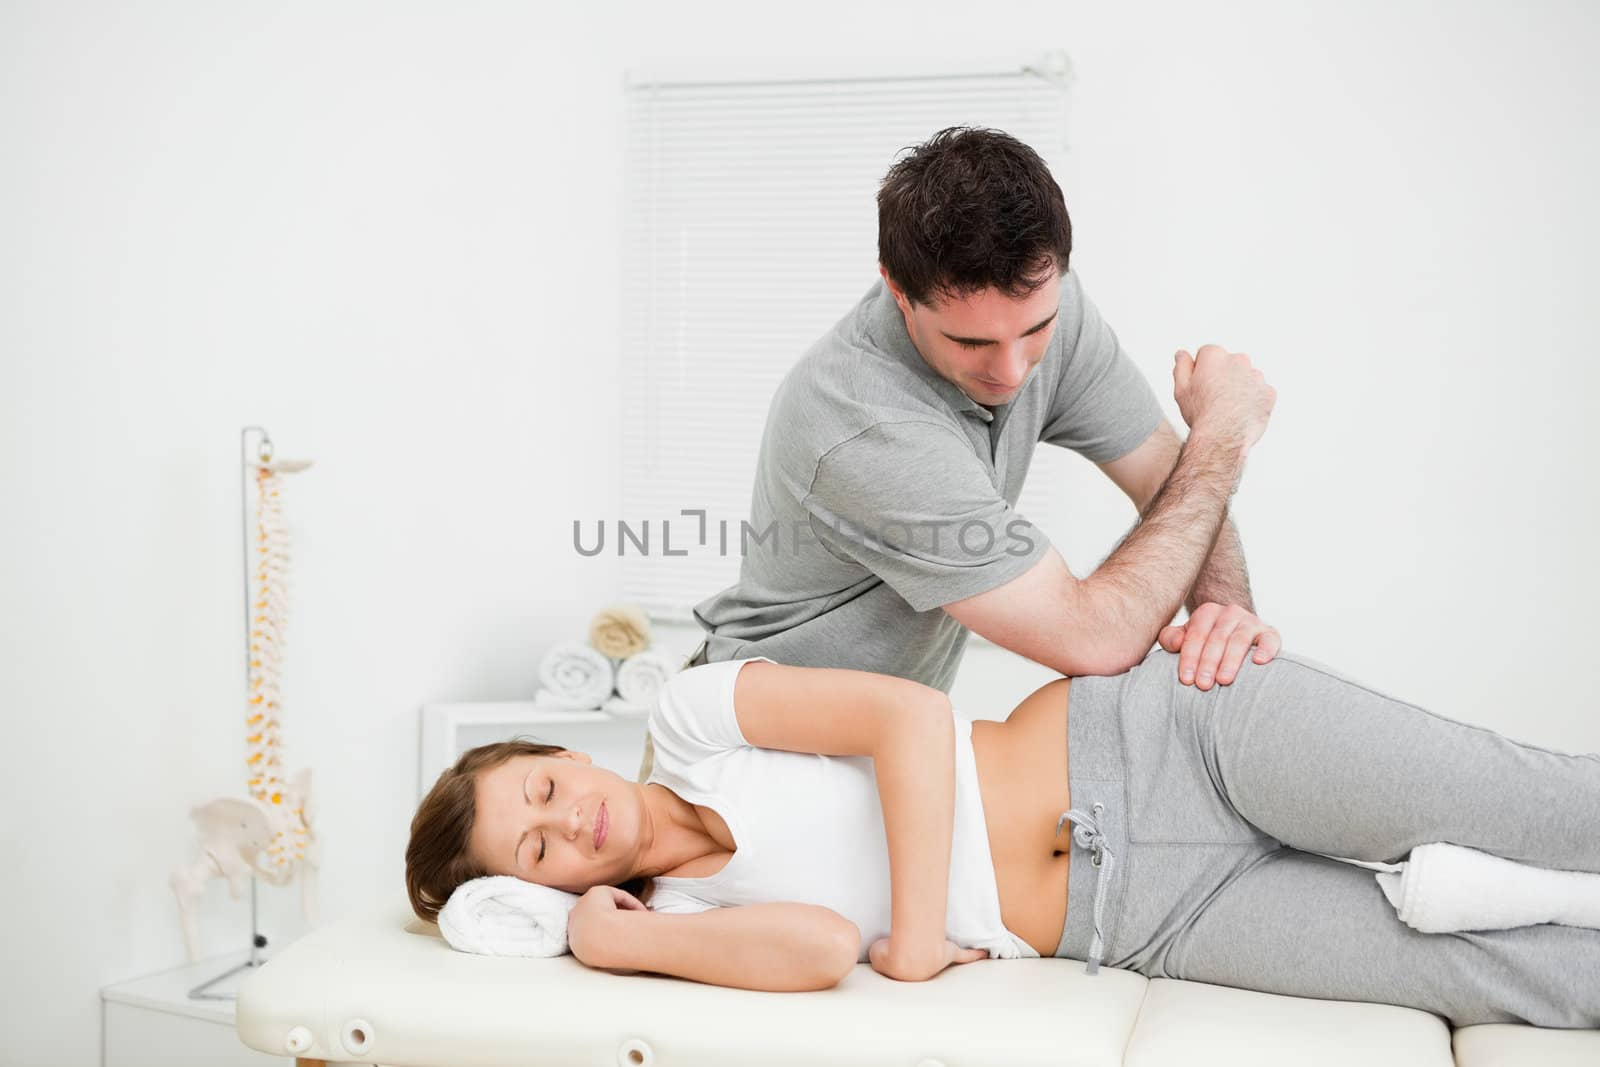 Doctor using his elbow to massage the hip of a woman in a room